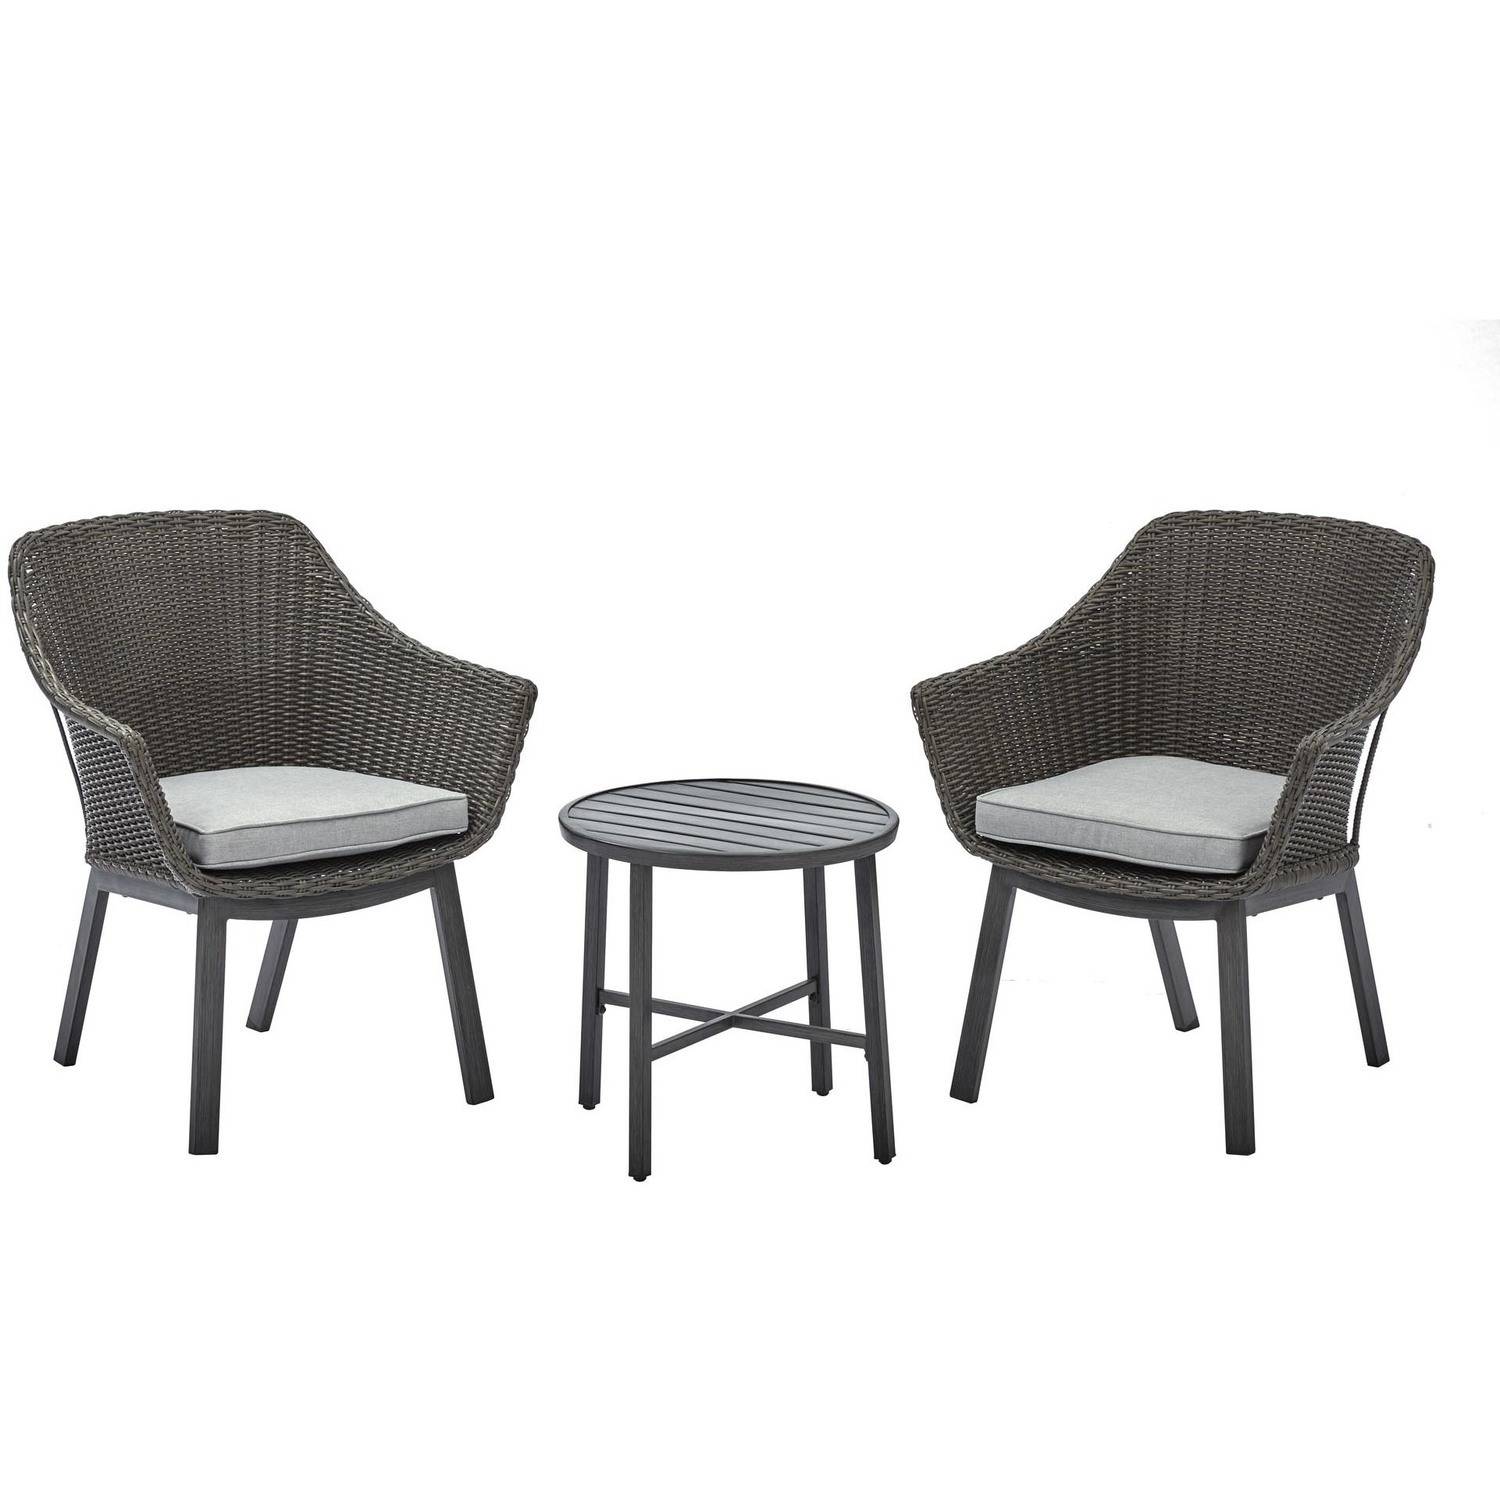 Better Homes & Gardens Cason Cove Contemporary 3 Piece Chat Set with Gray Cushions - image 1 of 5